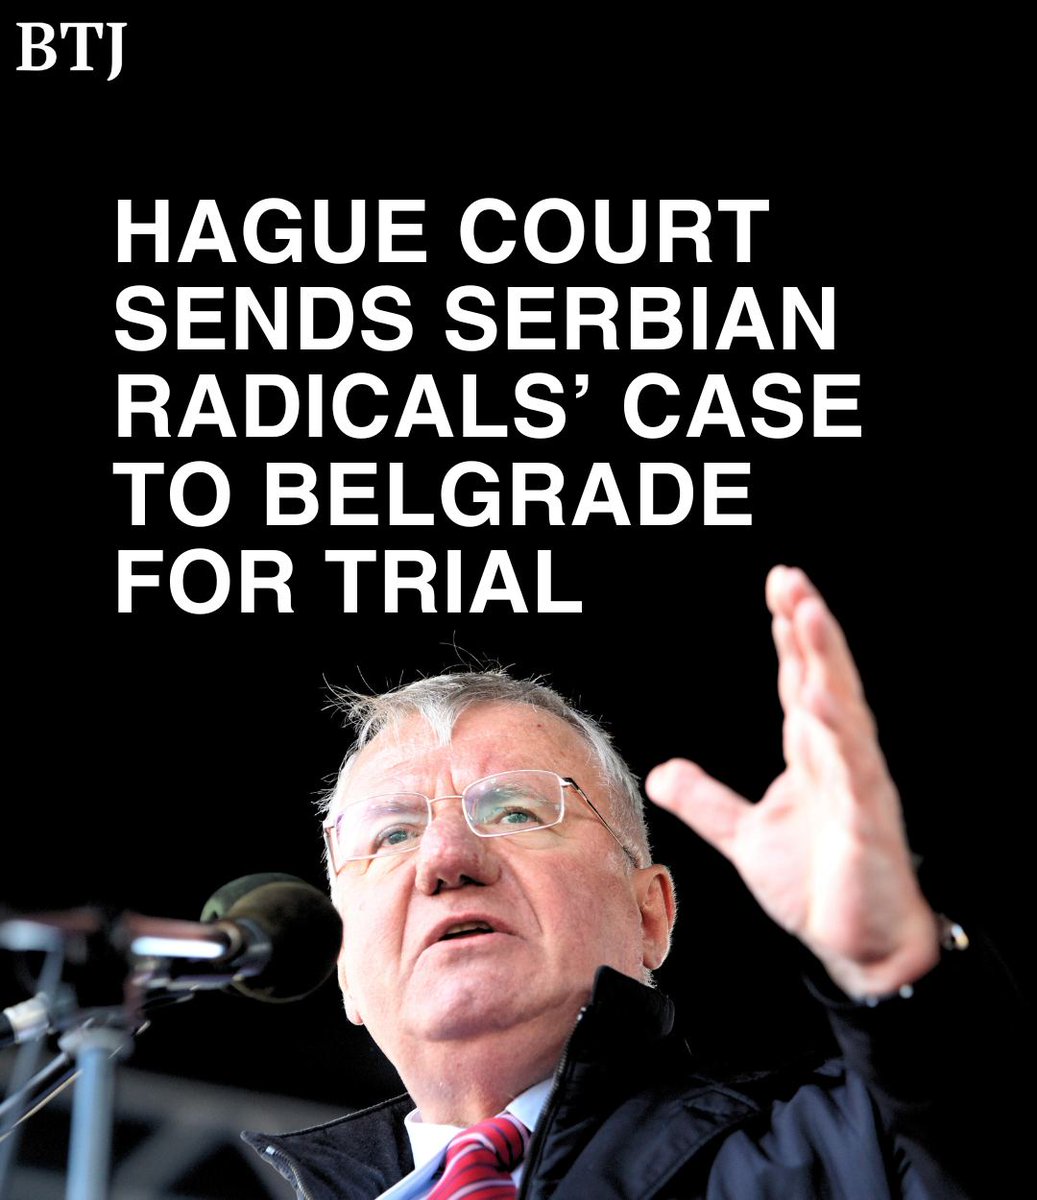 The UN war crimes tribunal in The Hague has sent the contempt of court case against ultranationalist Serbian Radical Party leader Vojislav Seselj and four co-accused to the Serbian judiciary for trial in Belgrade. Read more 👇 balkaninsight.com/2024/03/04/hag…